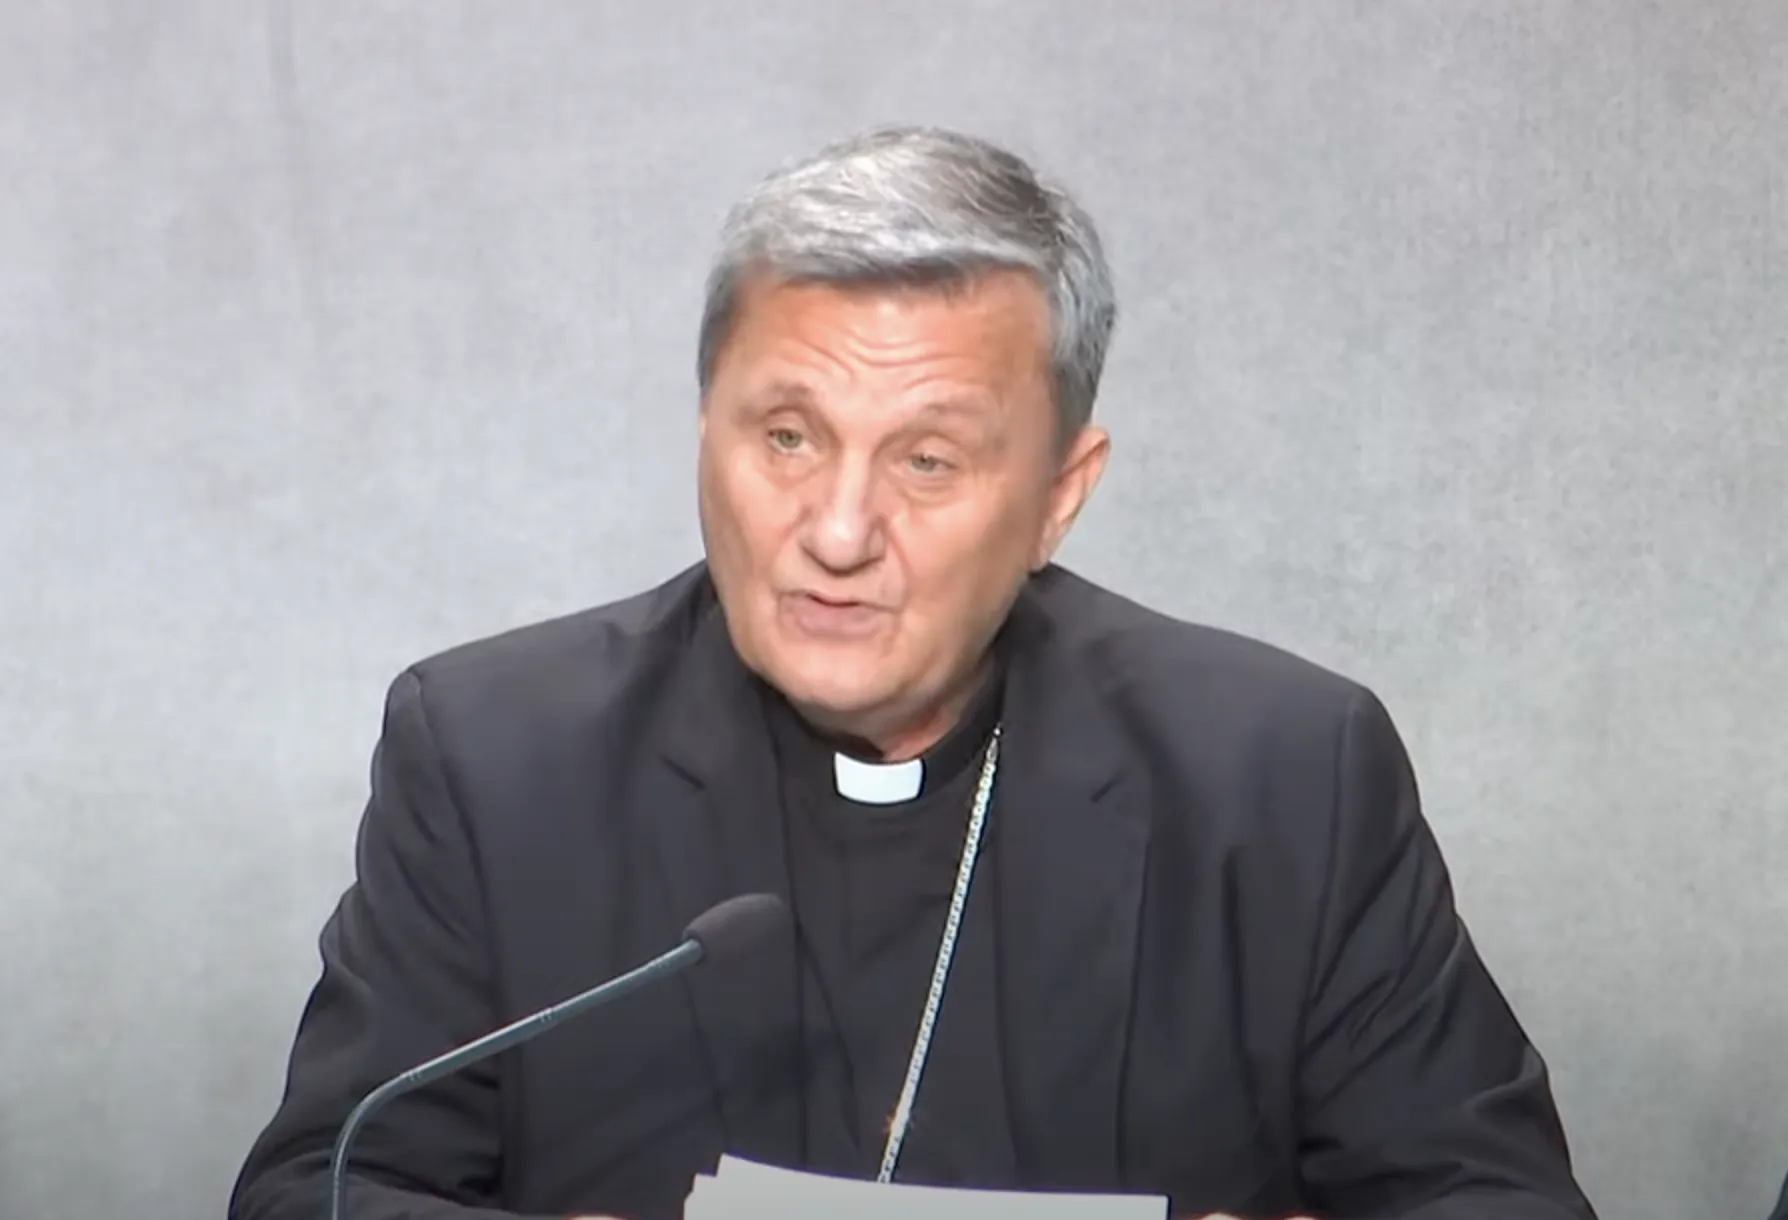 Cardinal Mario Grech speaking at the press conference in the Vatican on Aug. 26, 2022?w=200&h=150